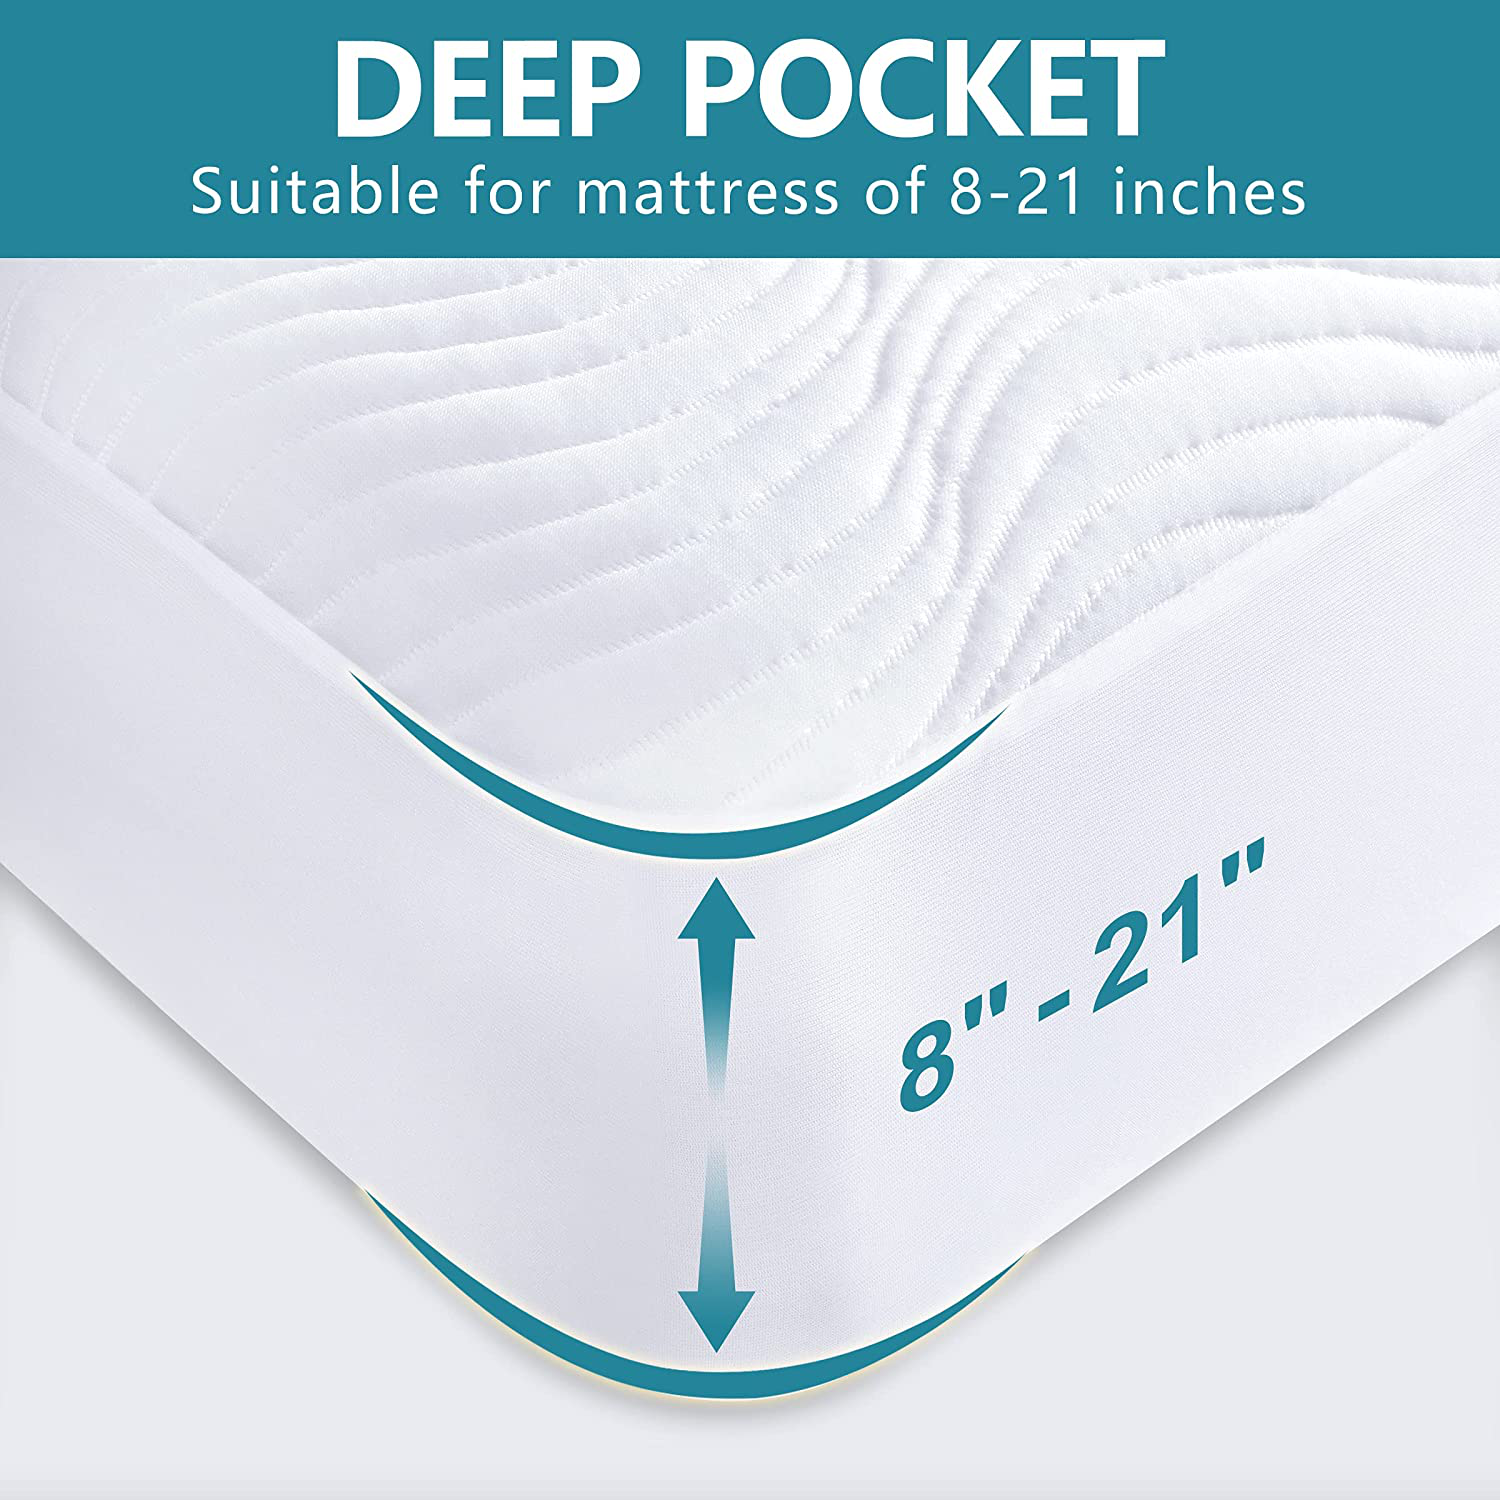 SINSAY Queen Size Waterproof Mattress Protector, Breathable Ultra-Soft & Noiseless Protector Cover, Stretchable Deep Pocket Fits Up to 21" Mattress Pad, Easy to Clean Machine-Wash Mattress Cove